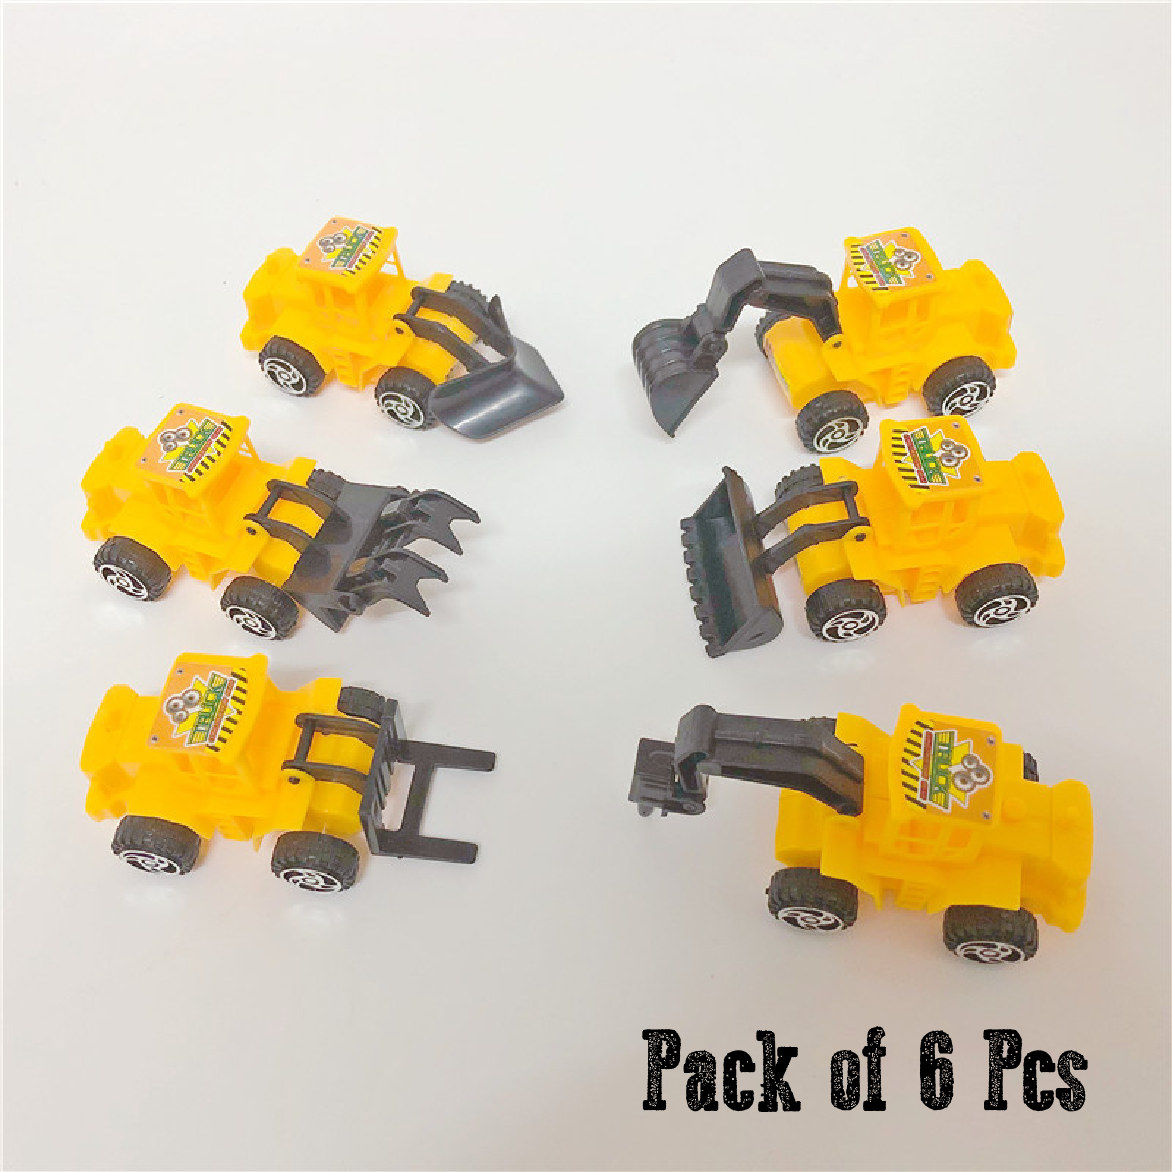 Cake Decoration, Cupcake Topper  - Construction Vehicles set of 6 - Rampant Coffee Company